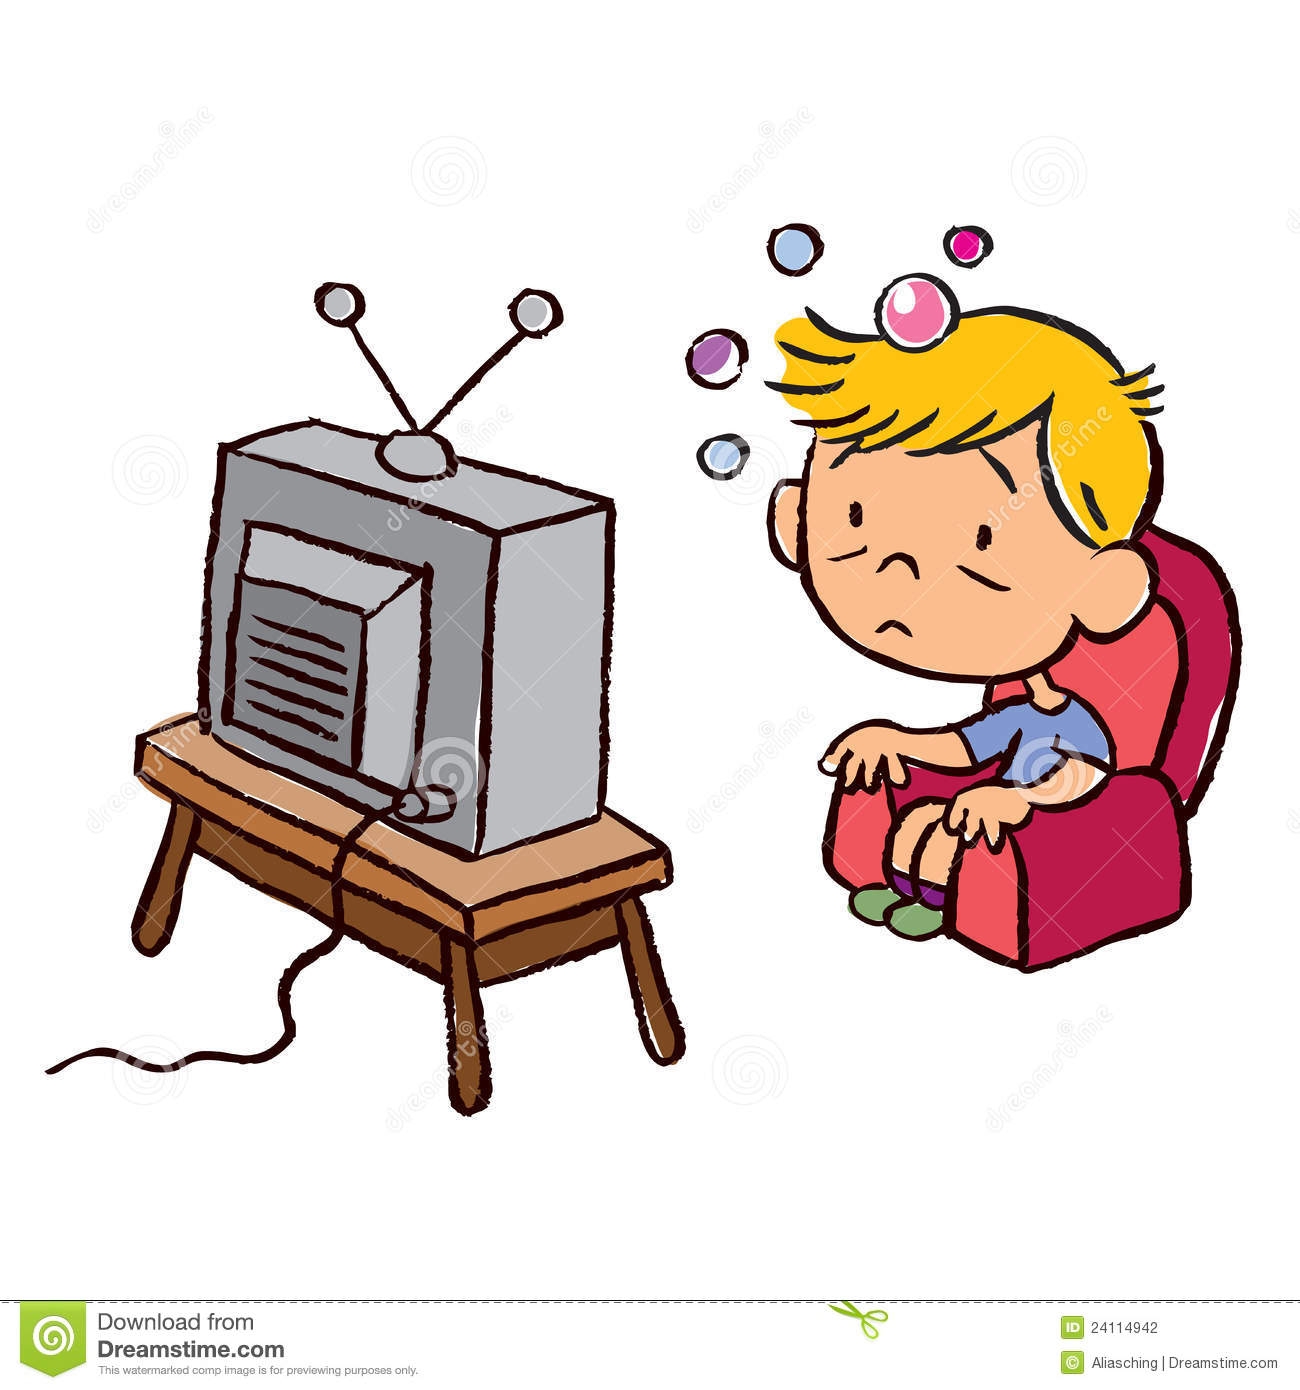 Pictures Of Kids Watching Tv